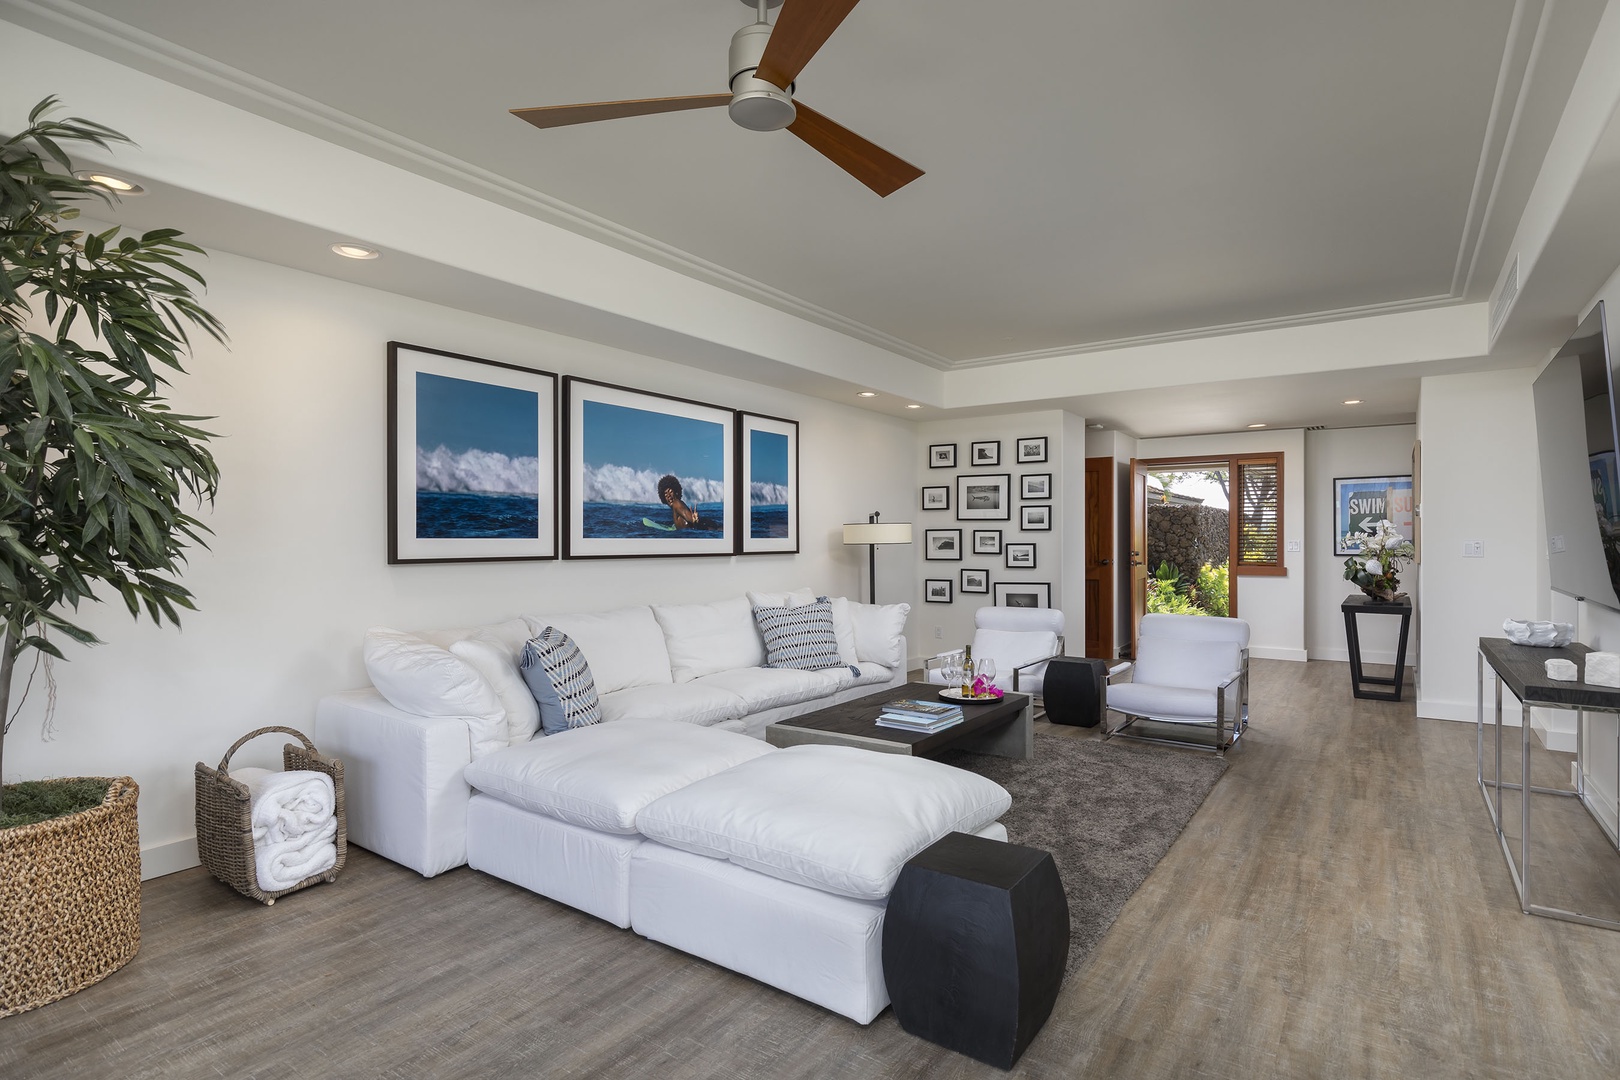 Kailua Kona Vacation Rentals, Hillside Villa 7101 - Great Room with lots of space for family and friends